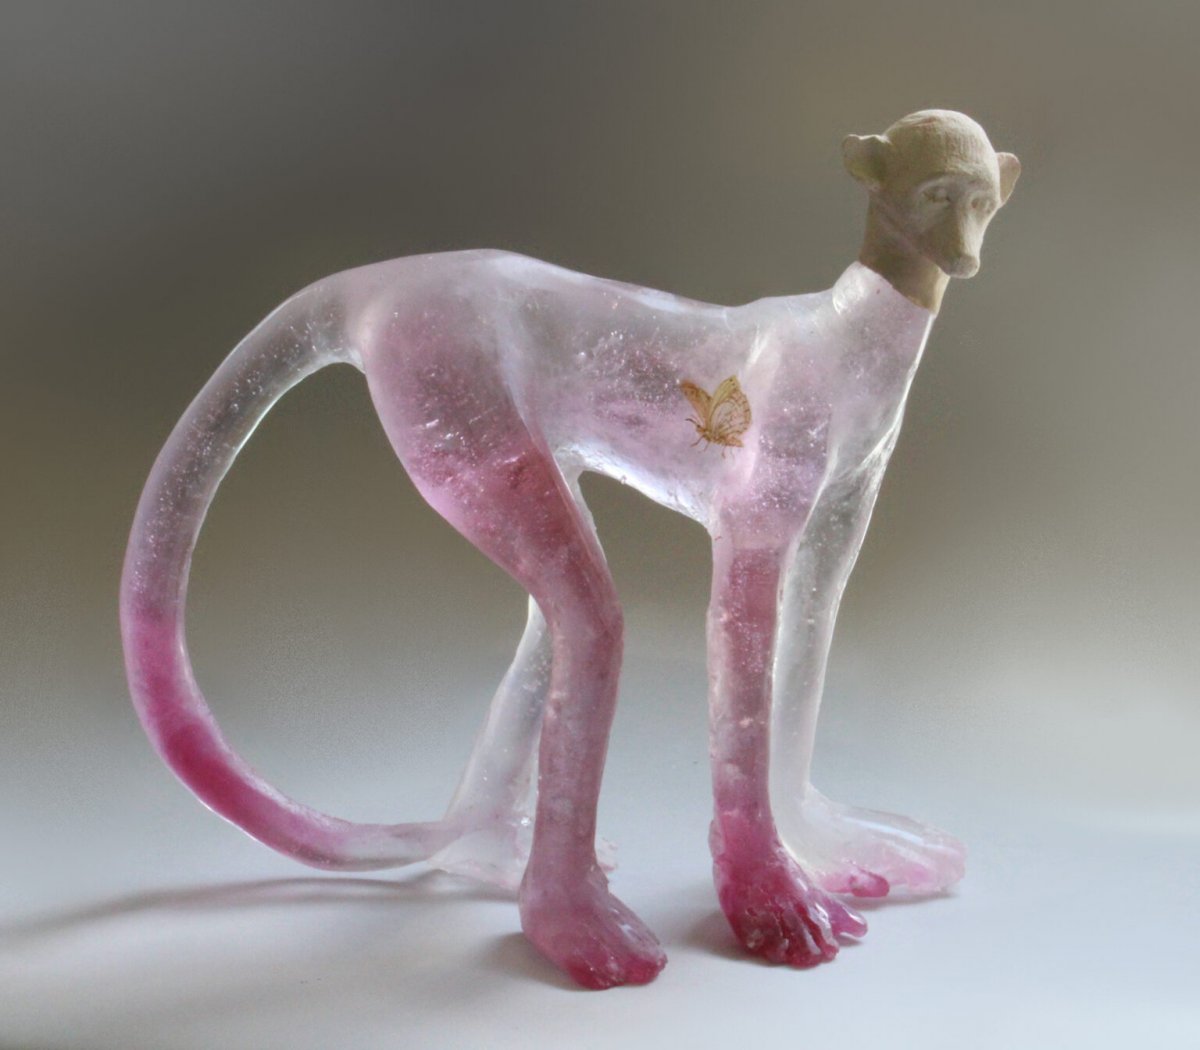 Ethereal Surrealist Sculptures Made Of Translucent Glass And Clay By Christina Bothwell 2